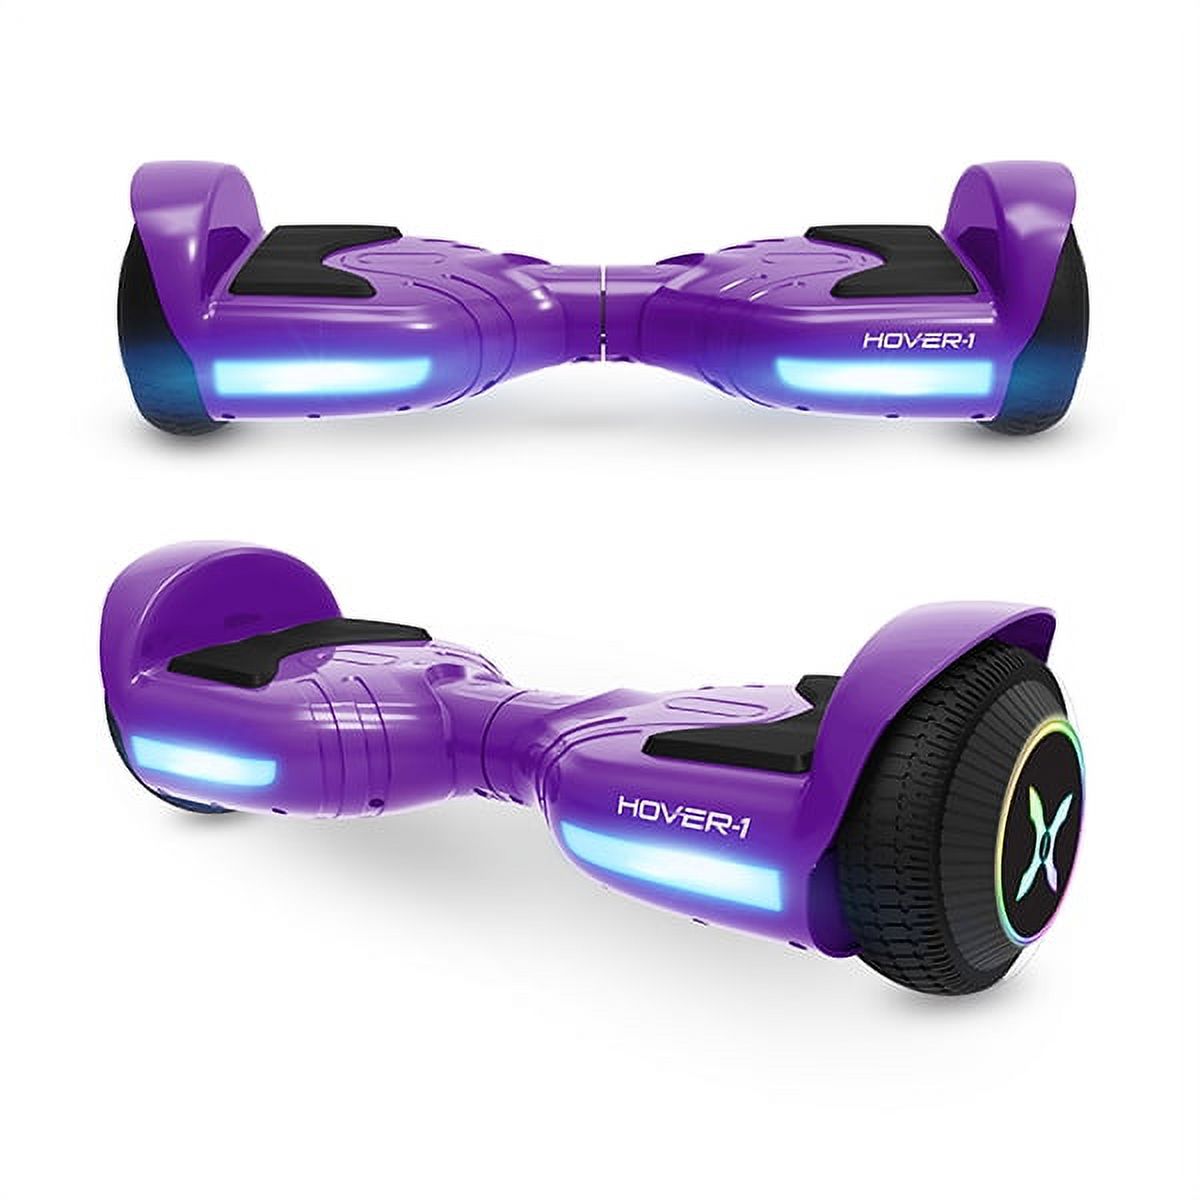 Hover-1 Rocket Hoverboard for Children, 7 MPH Max Speed, Purple - image 2 of 7